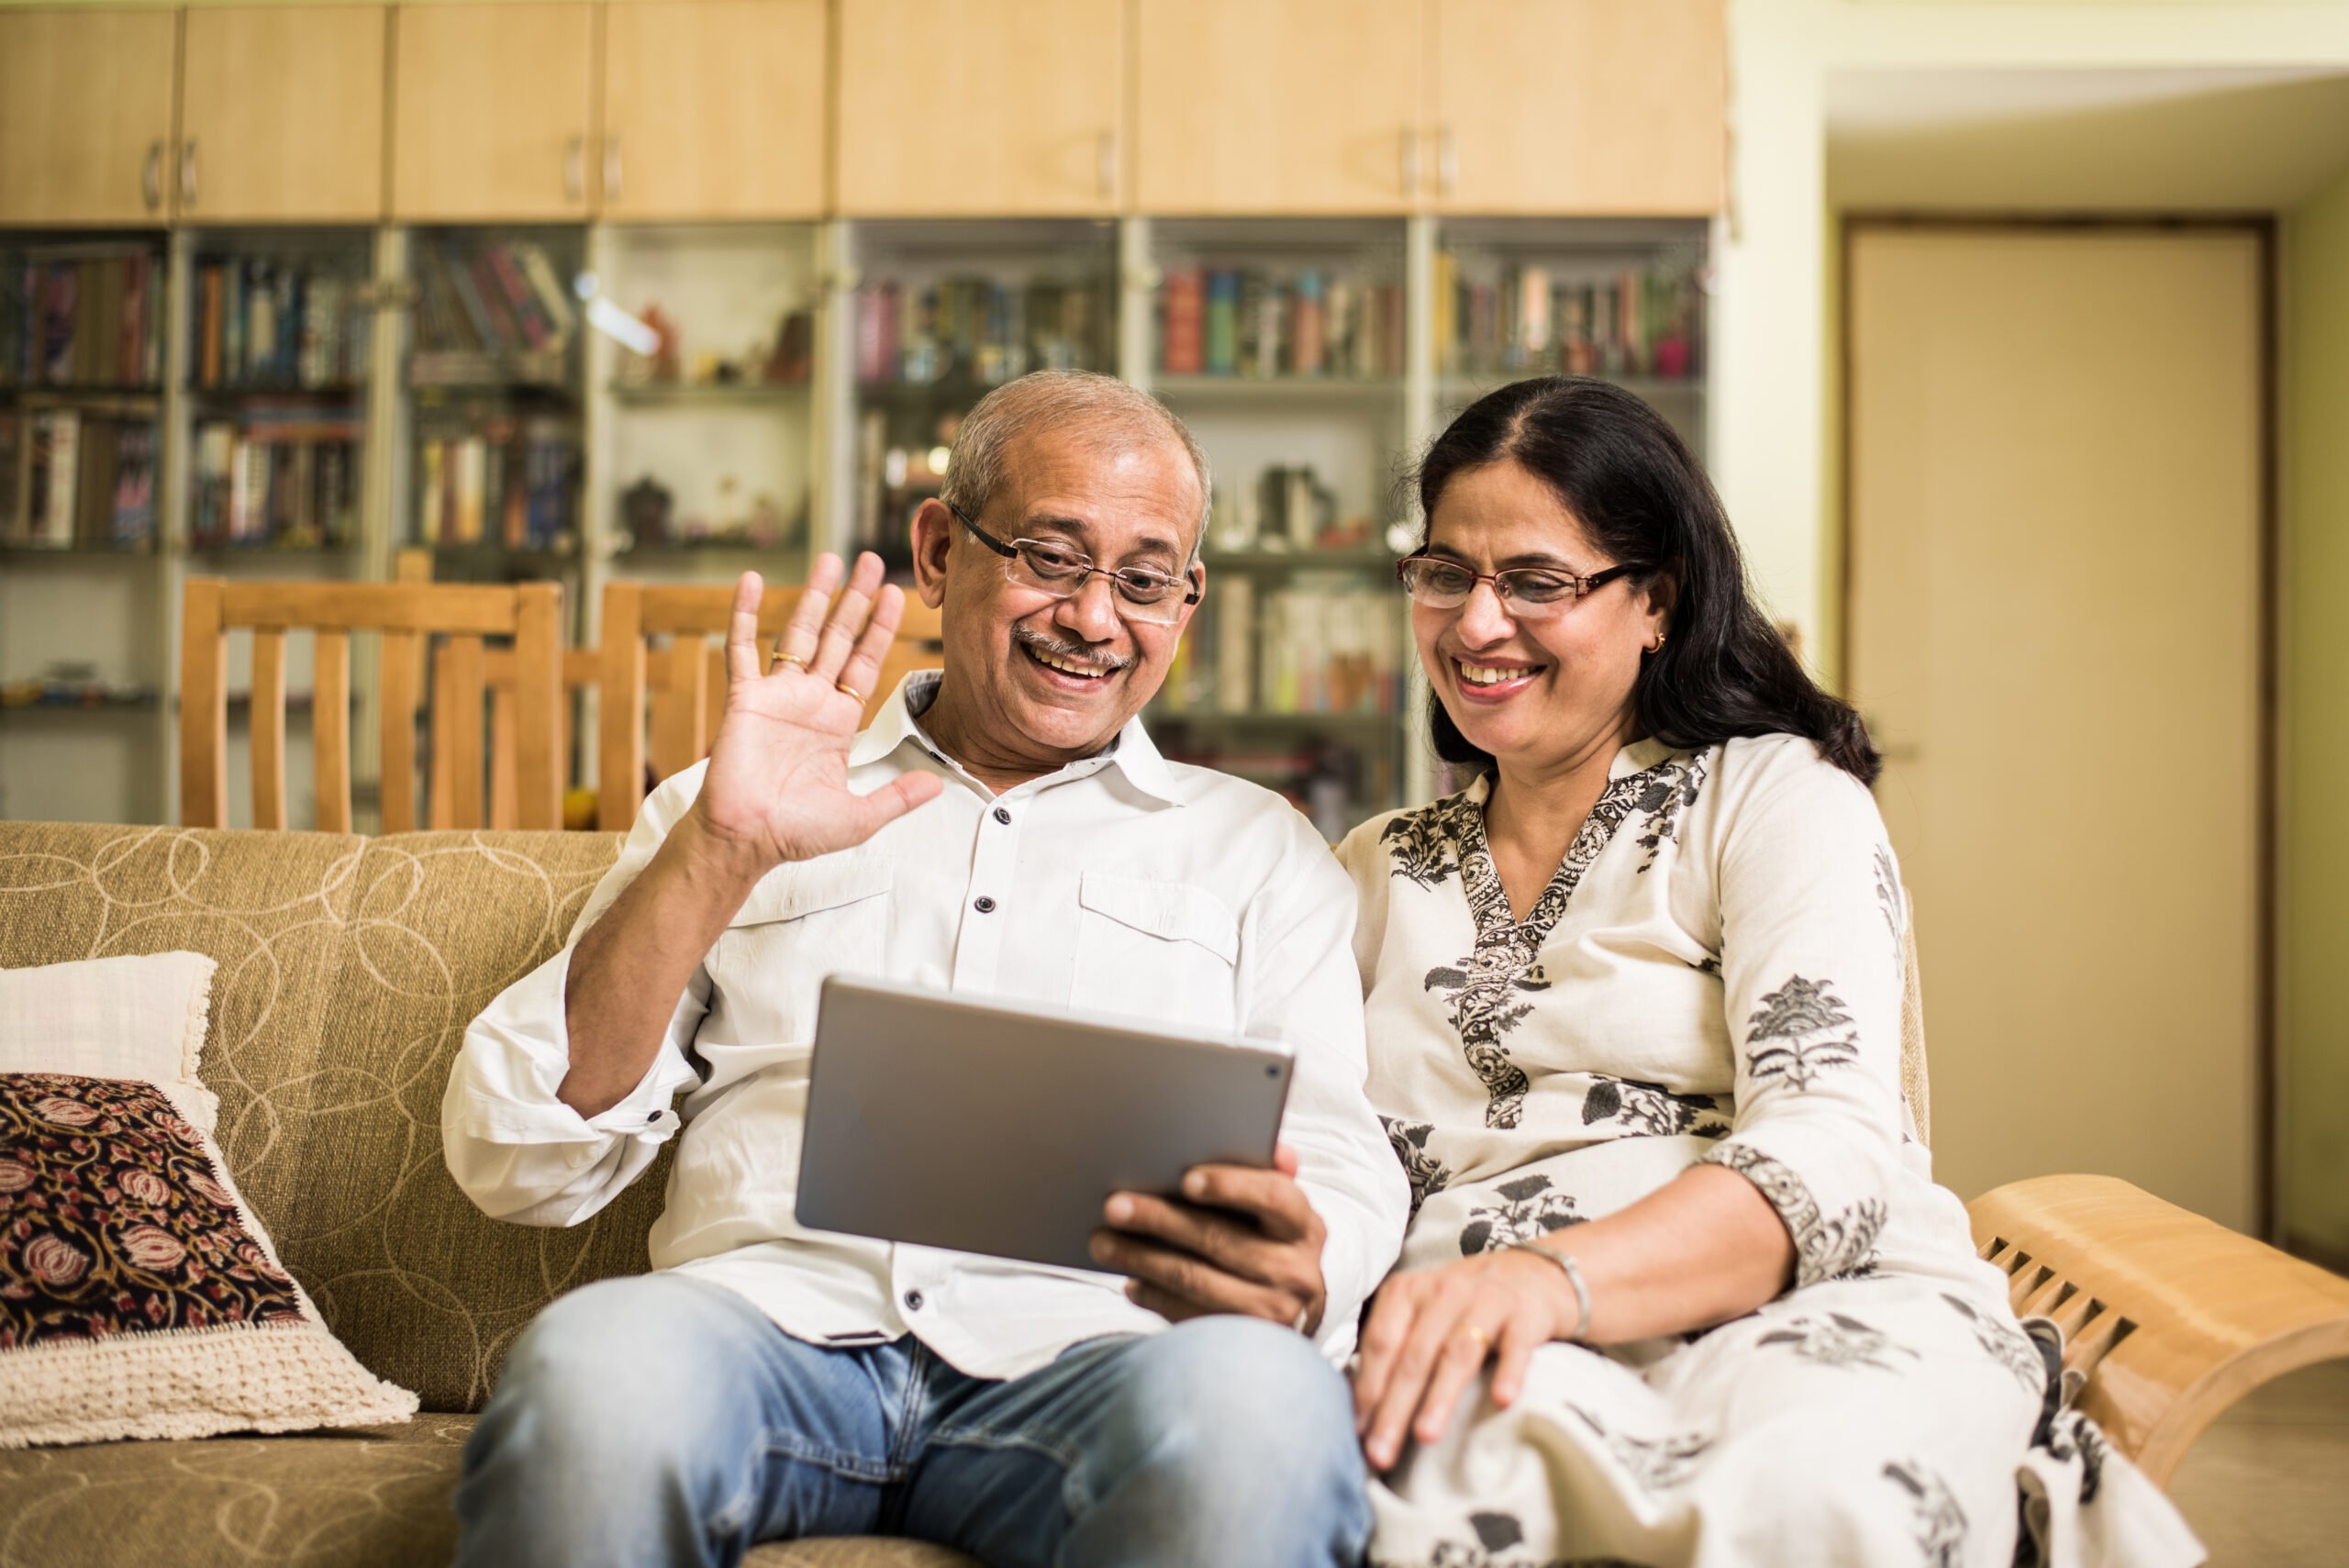 Two Indian people sat on a couch. The man on the left of the image is wearing glasses and is waving at a tablet screen, the woman on the right is wearing glasses and is smiling. They are in a home environment. 